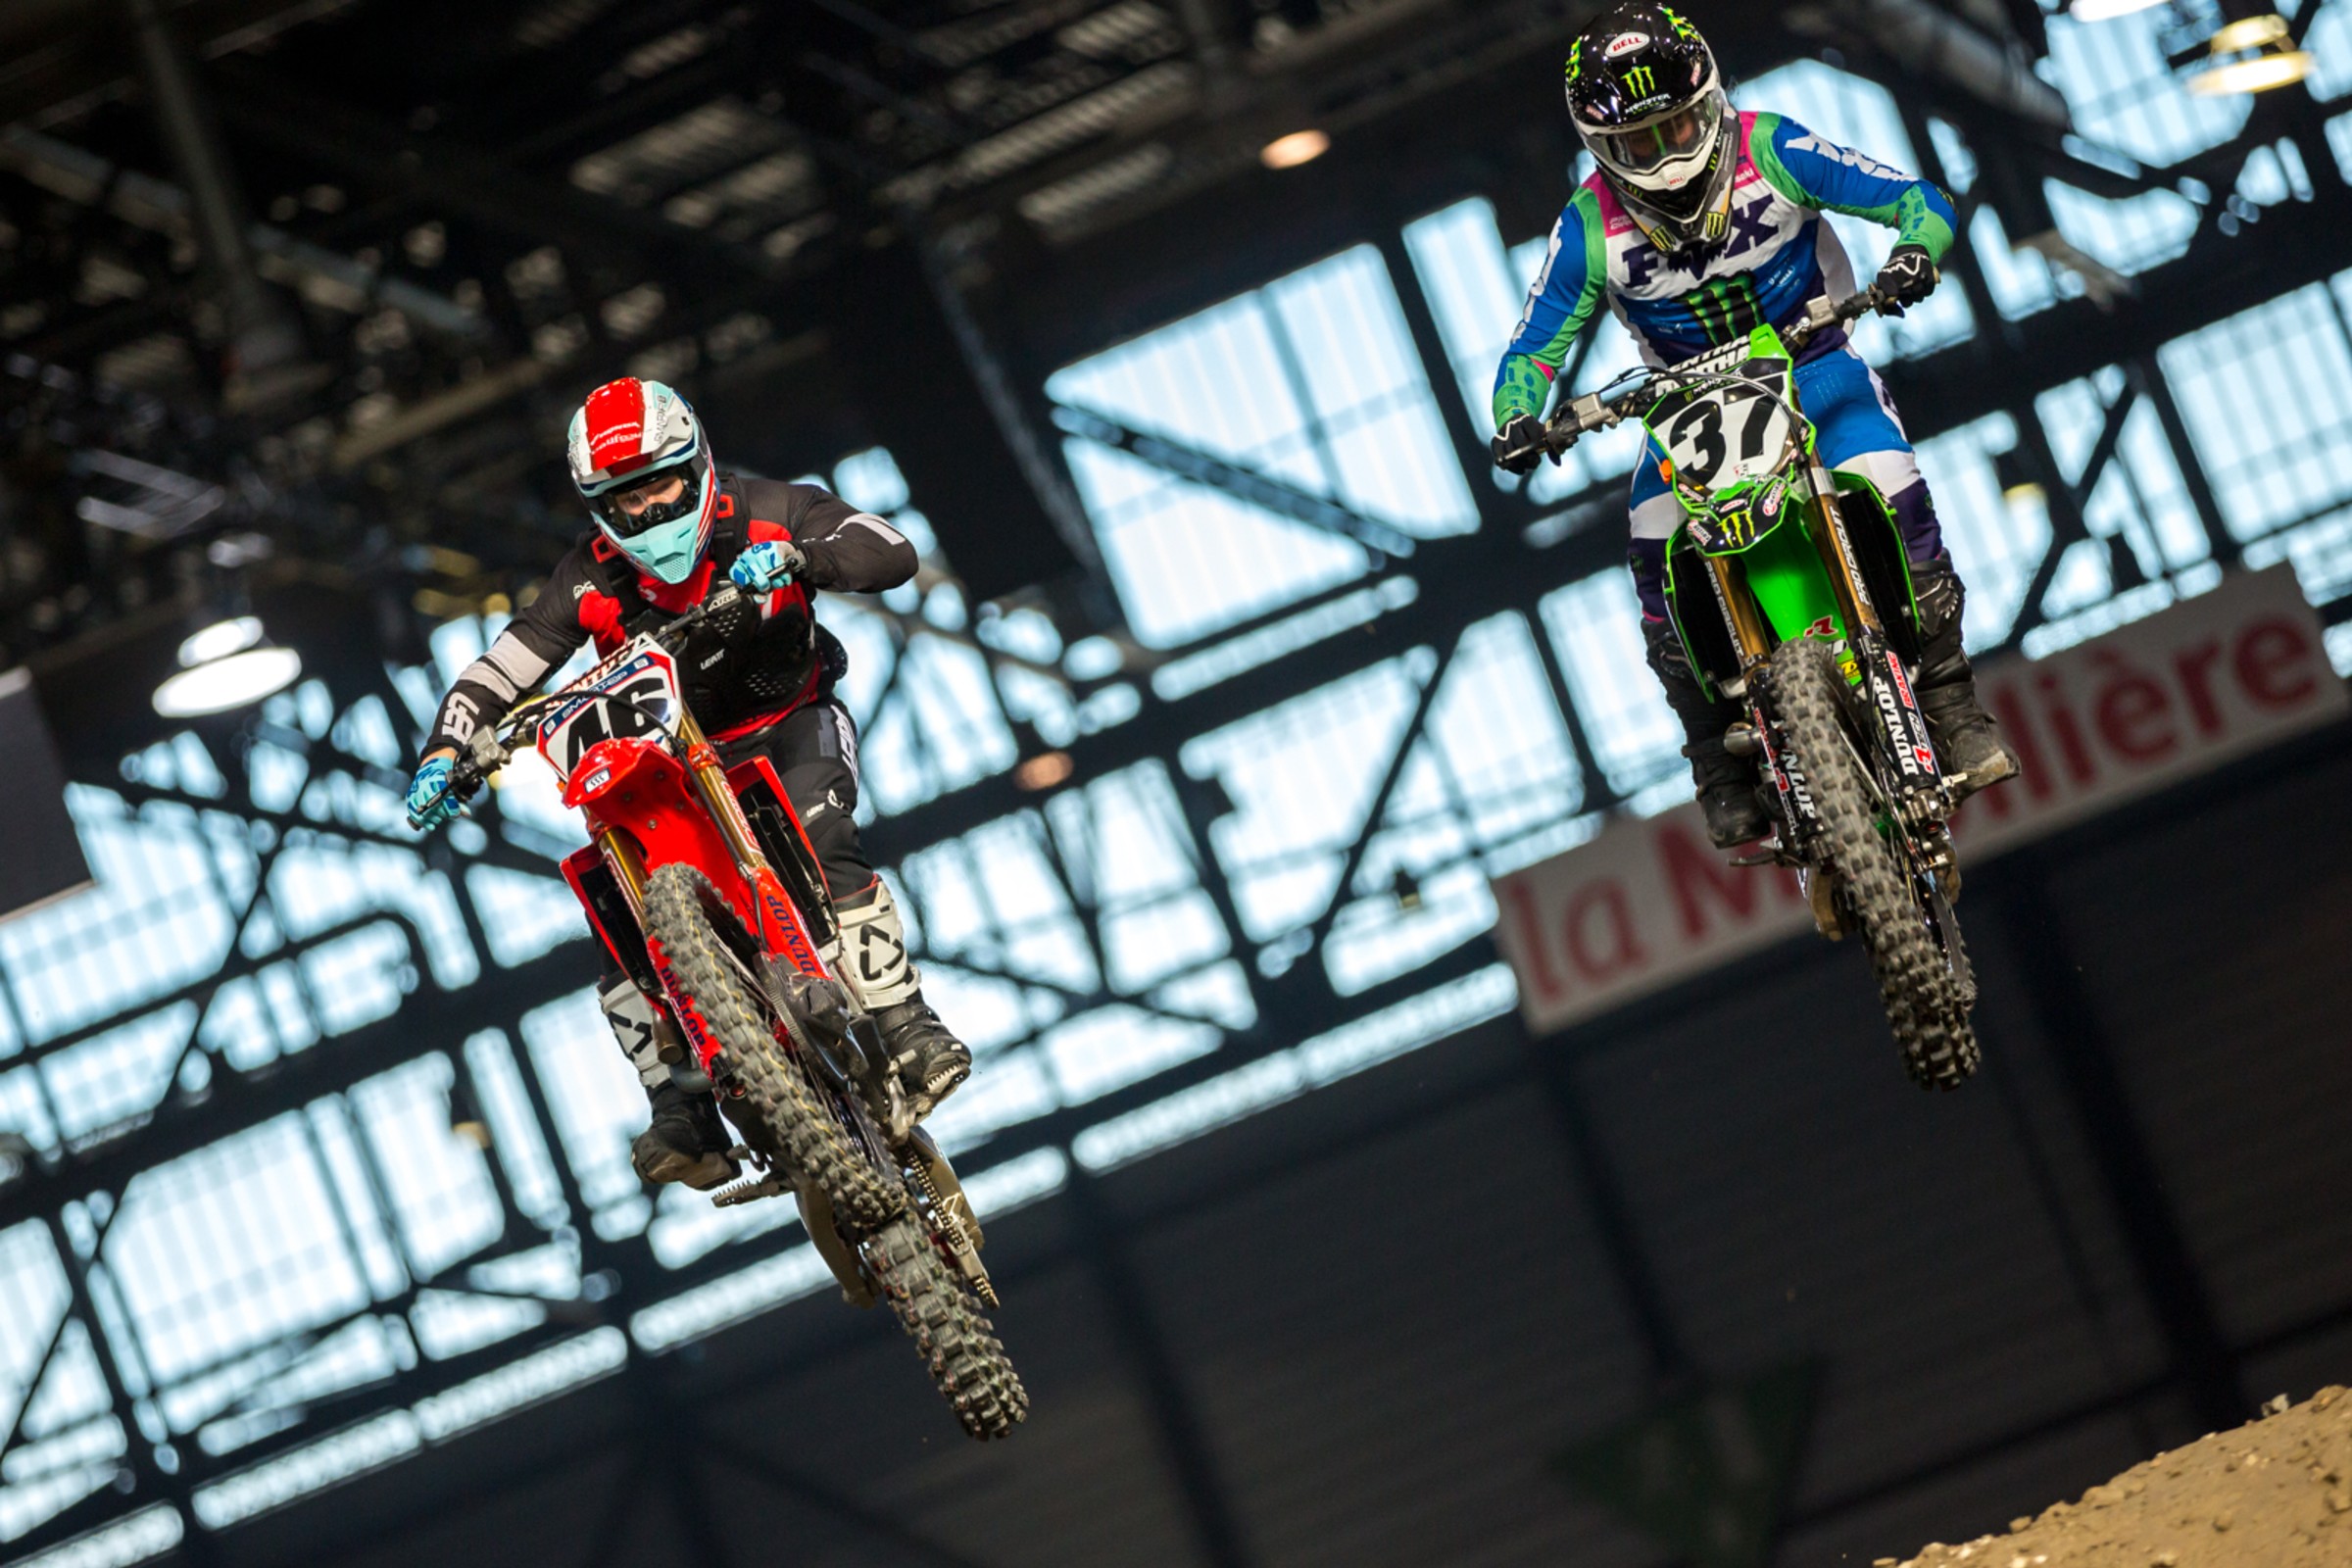 2019 Geneva Supercross Entry List and Live Timing